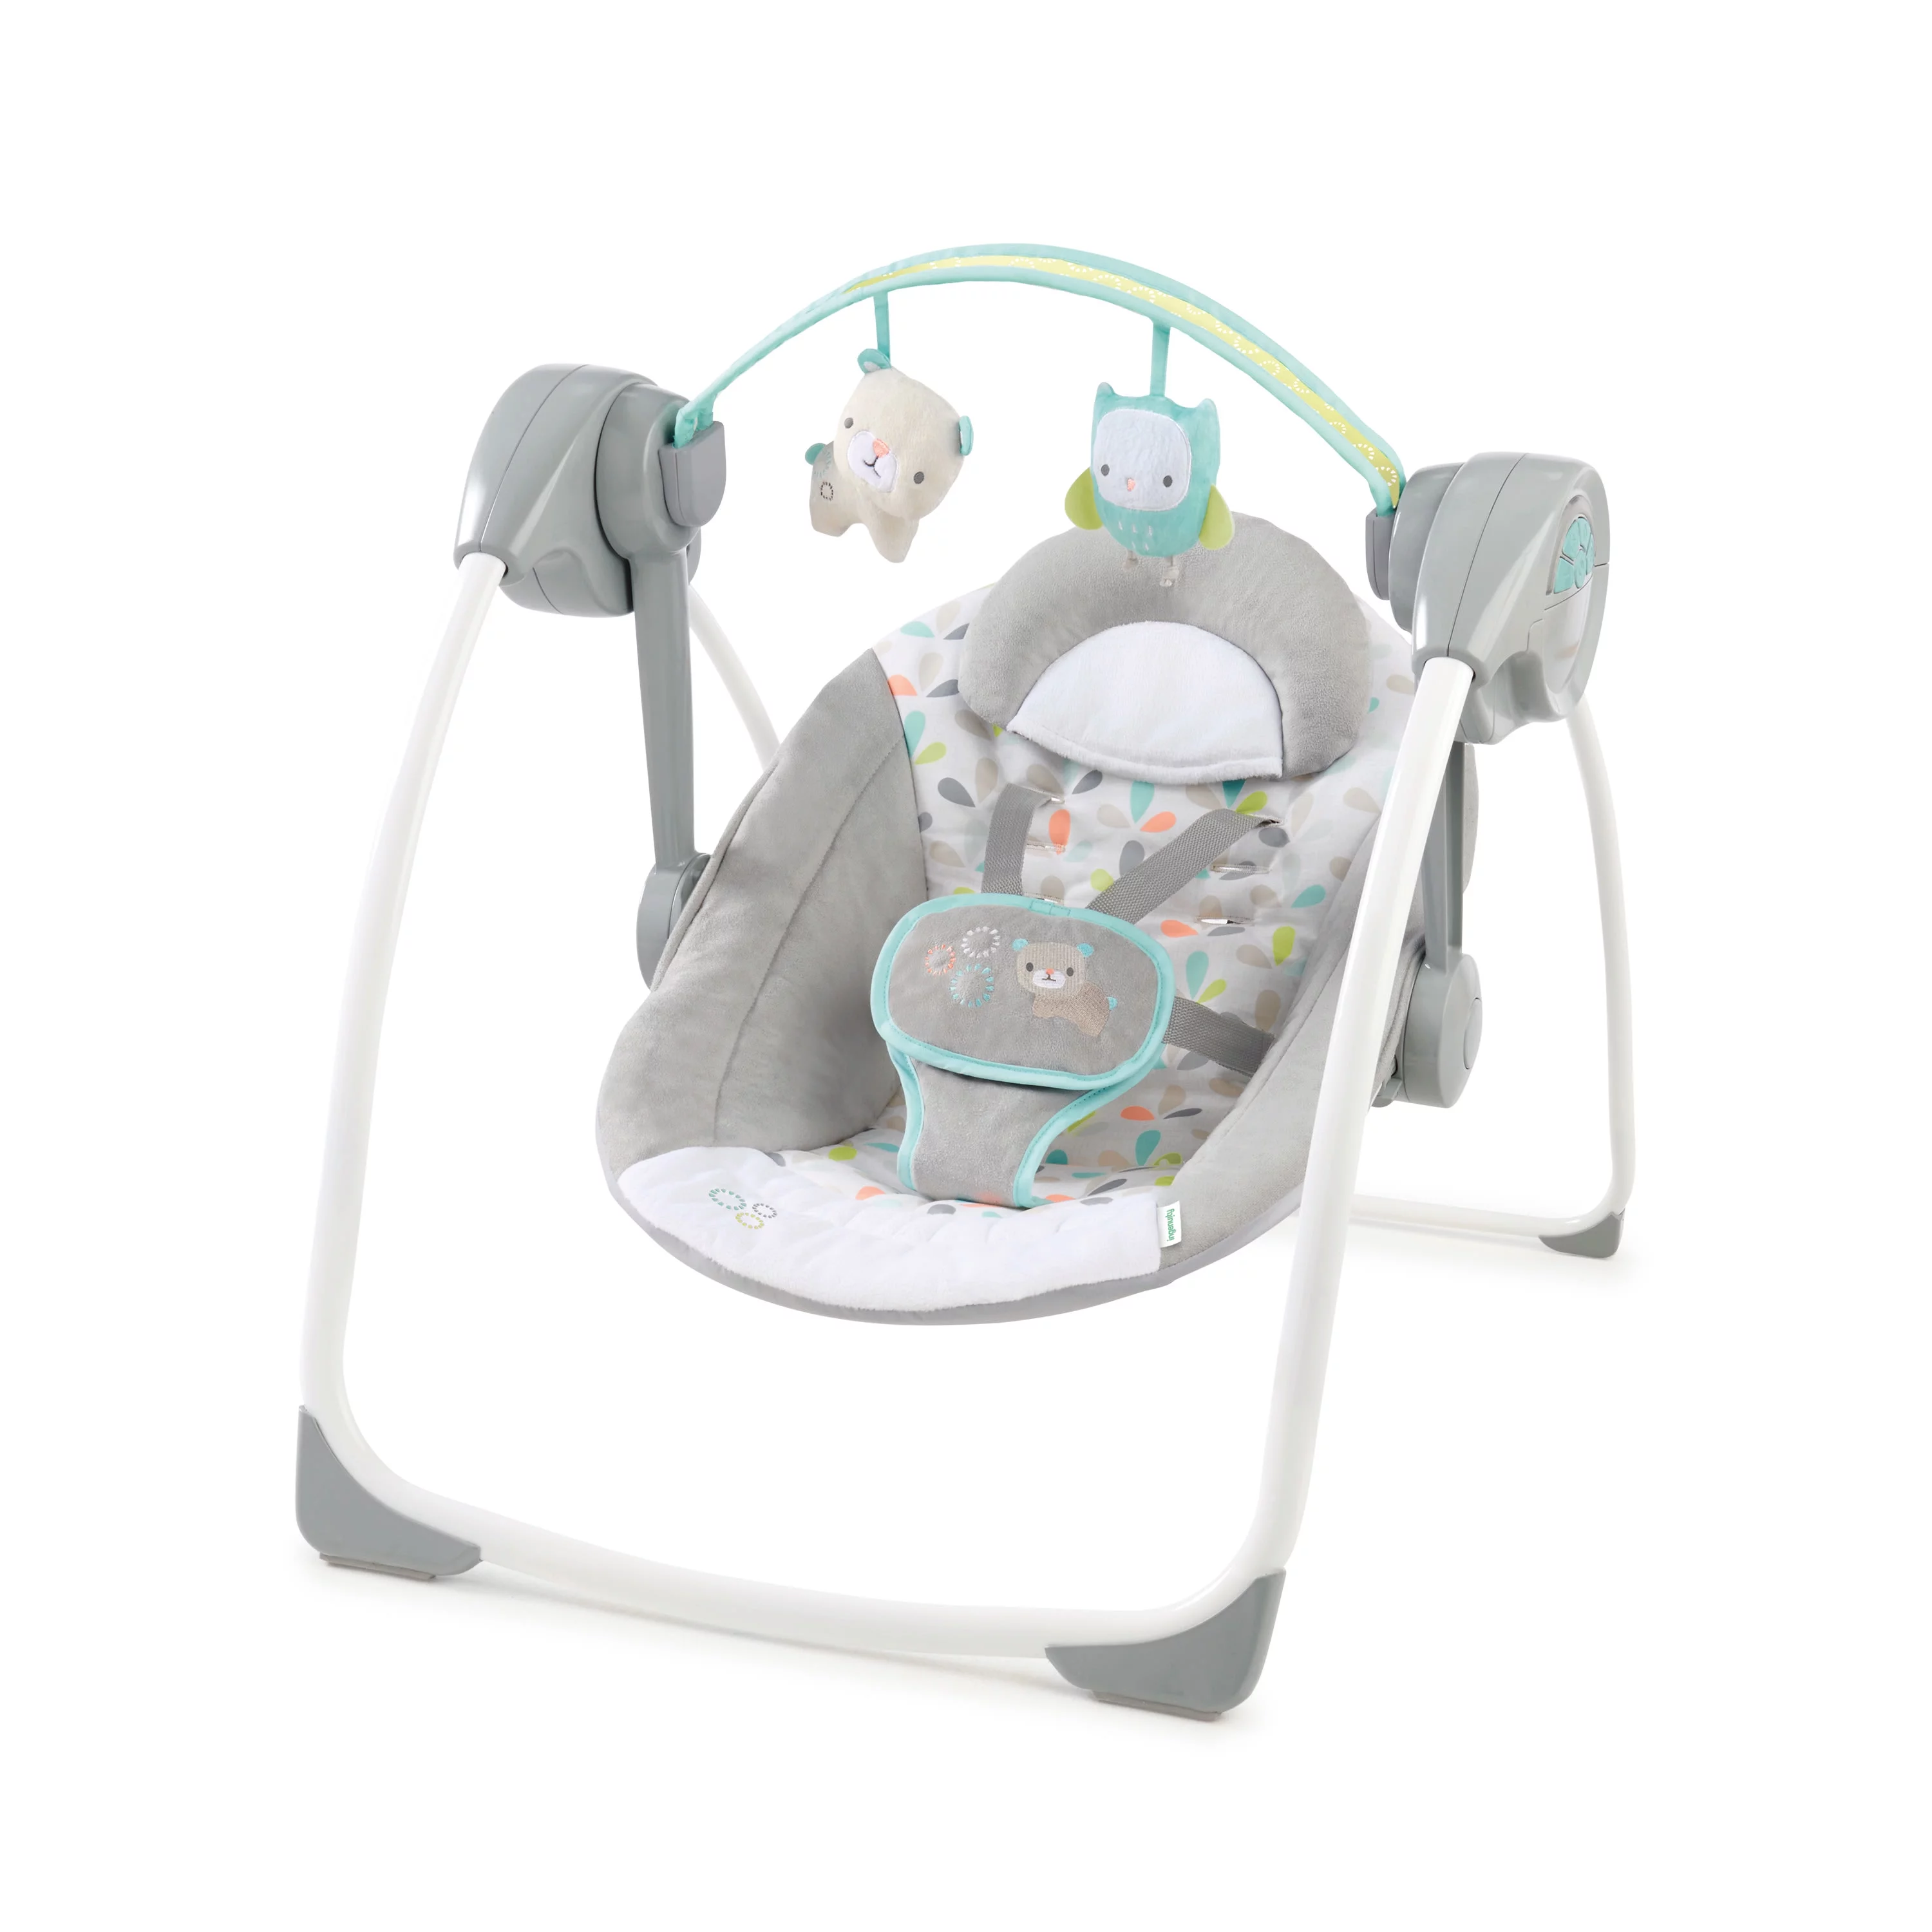 Ingenuity Soothe 'n Delight Portable Baby Swing with Music, Gray